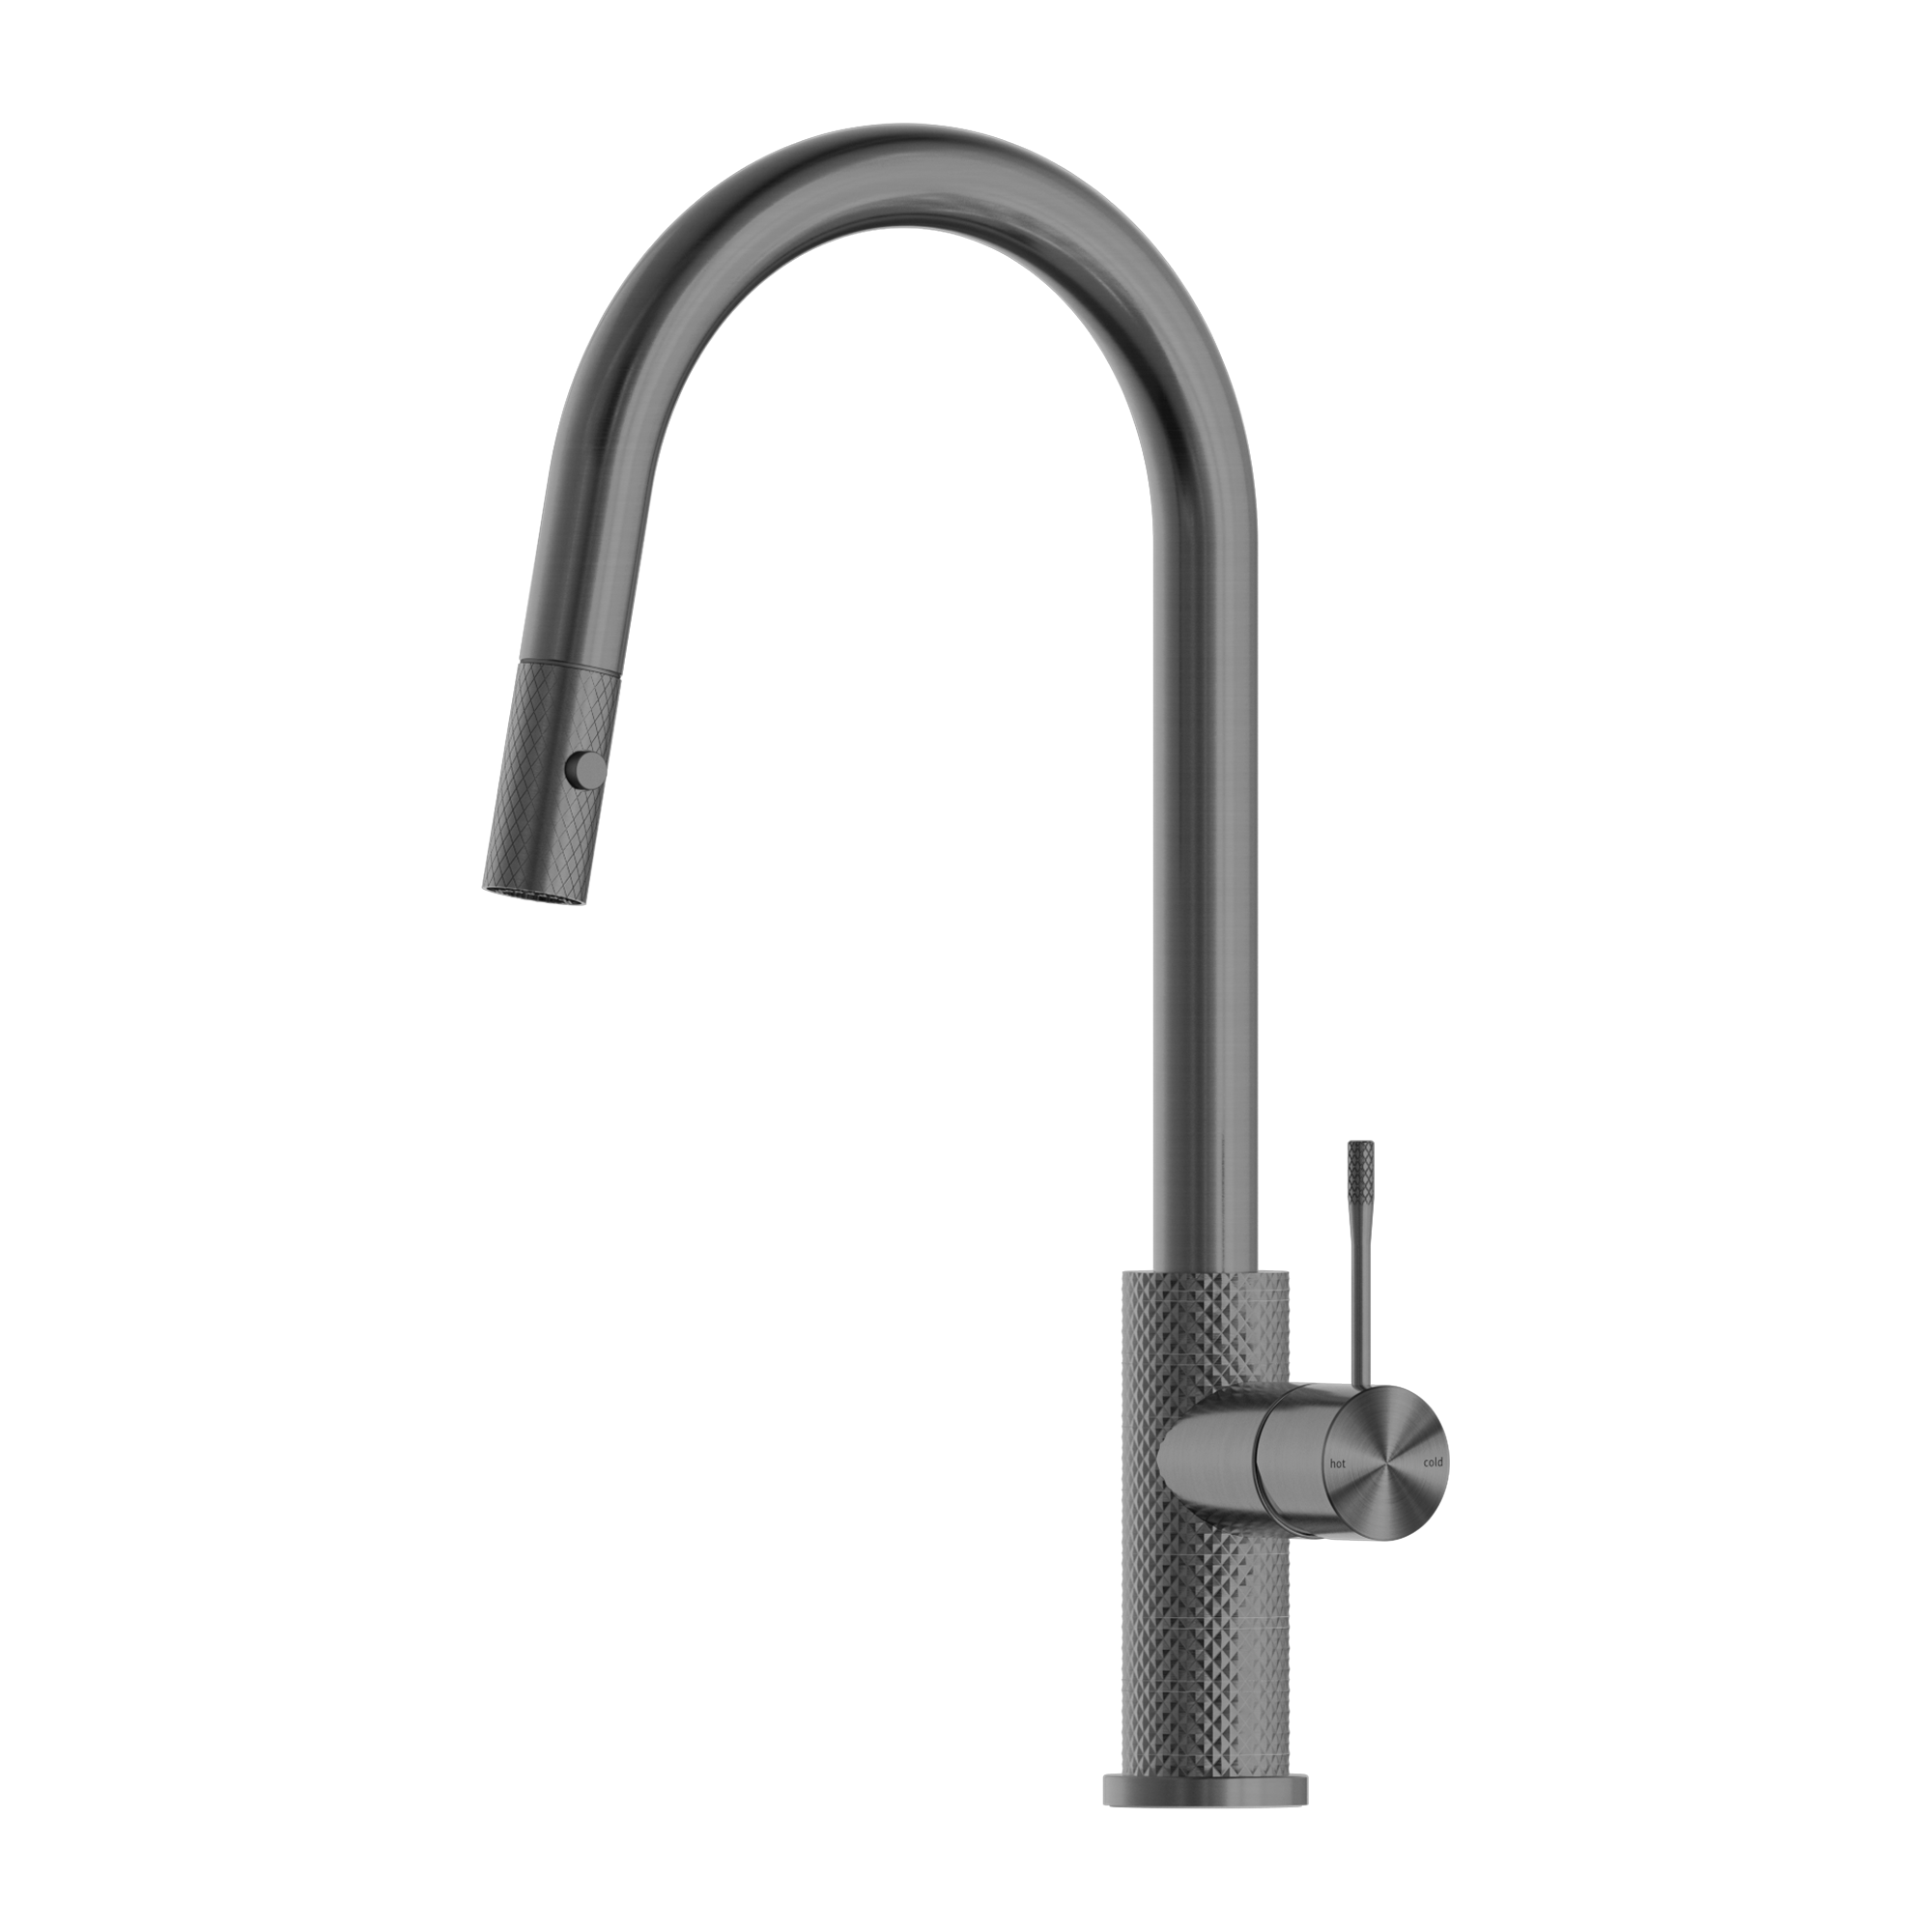 Opal pull out sink mixer with vegie spray function